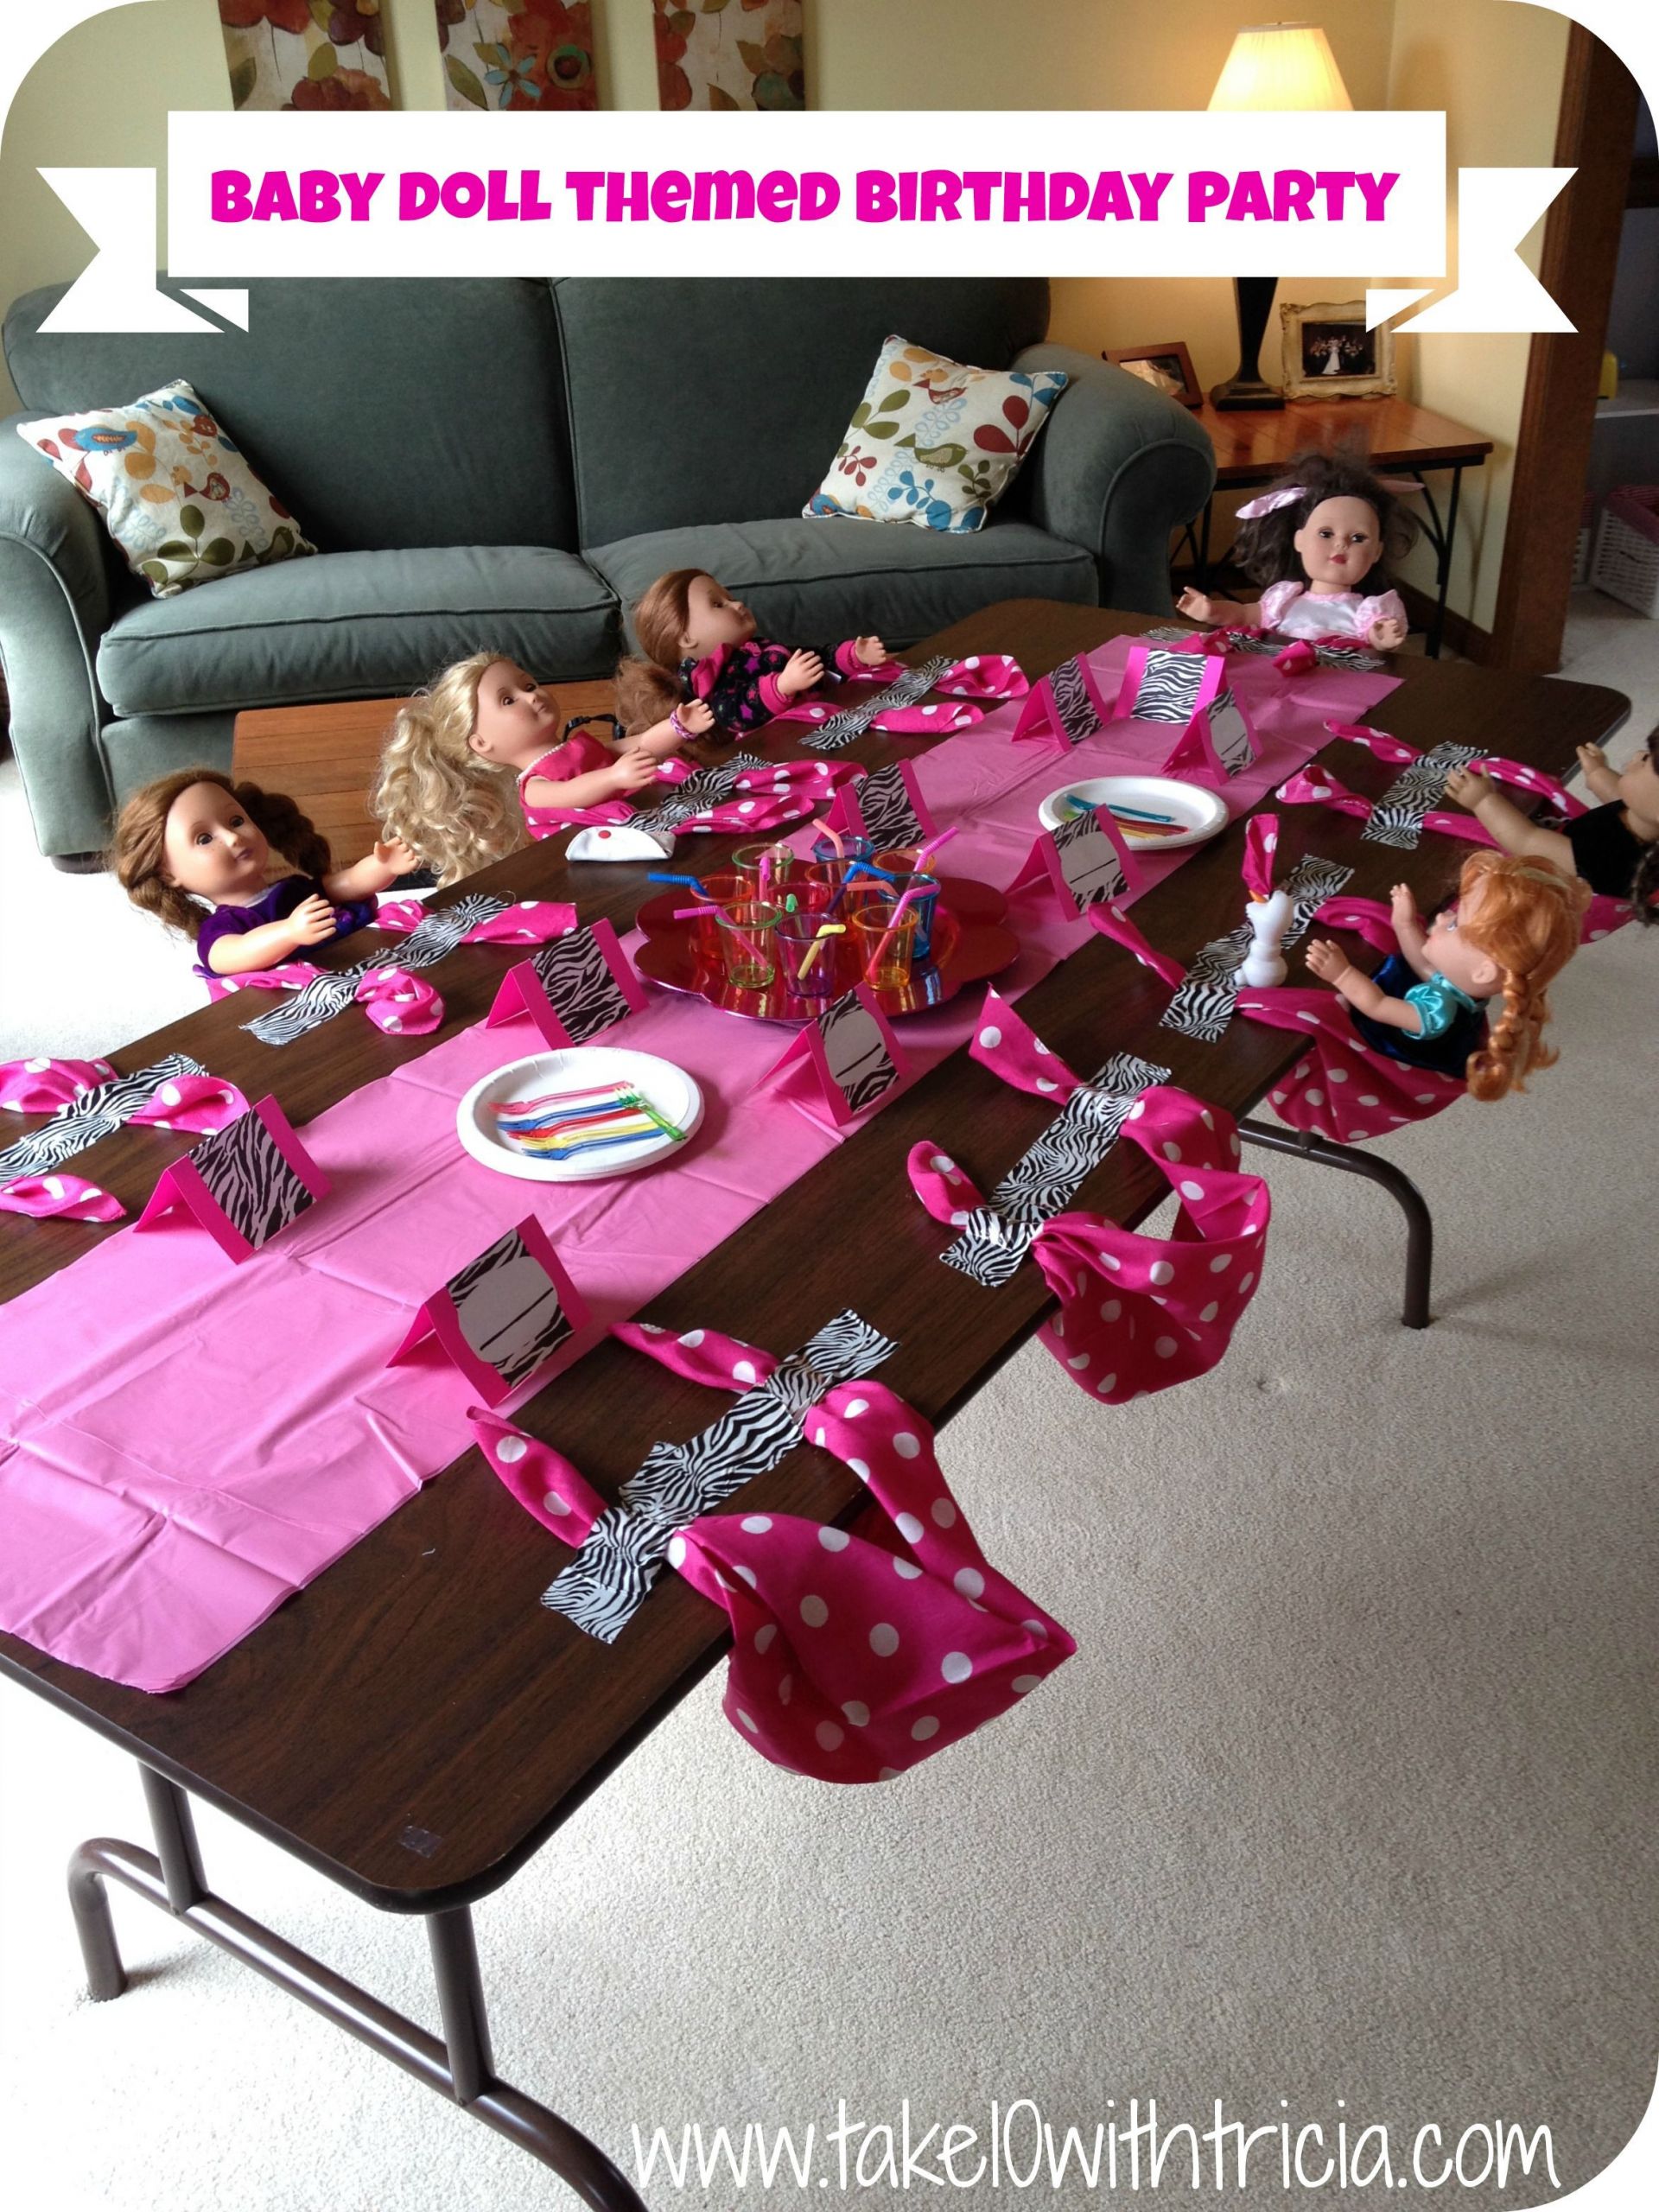 American Girl Tea Party Food Ideas
 Great idea to seat lots of dolls at a party I really like